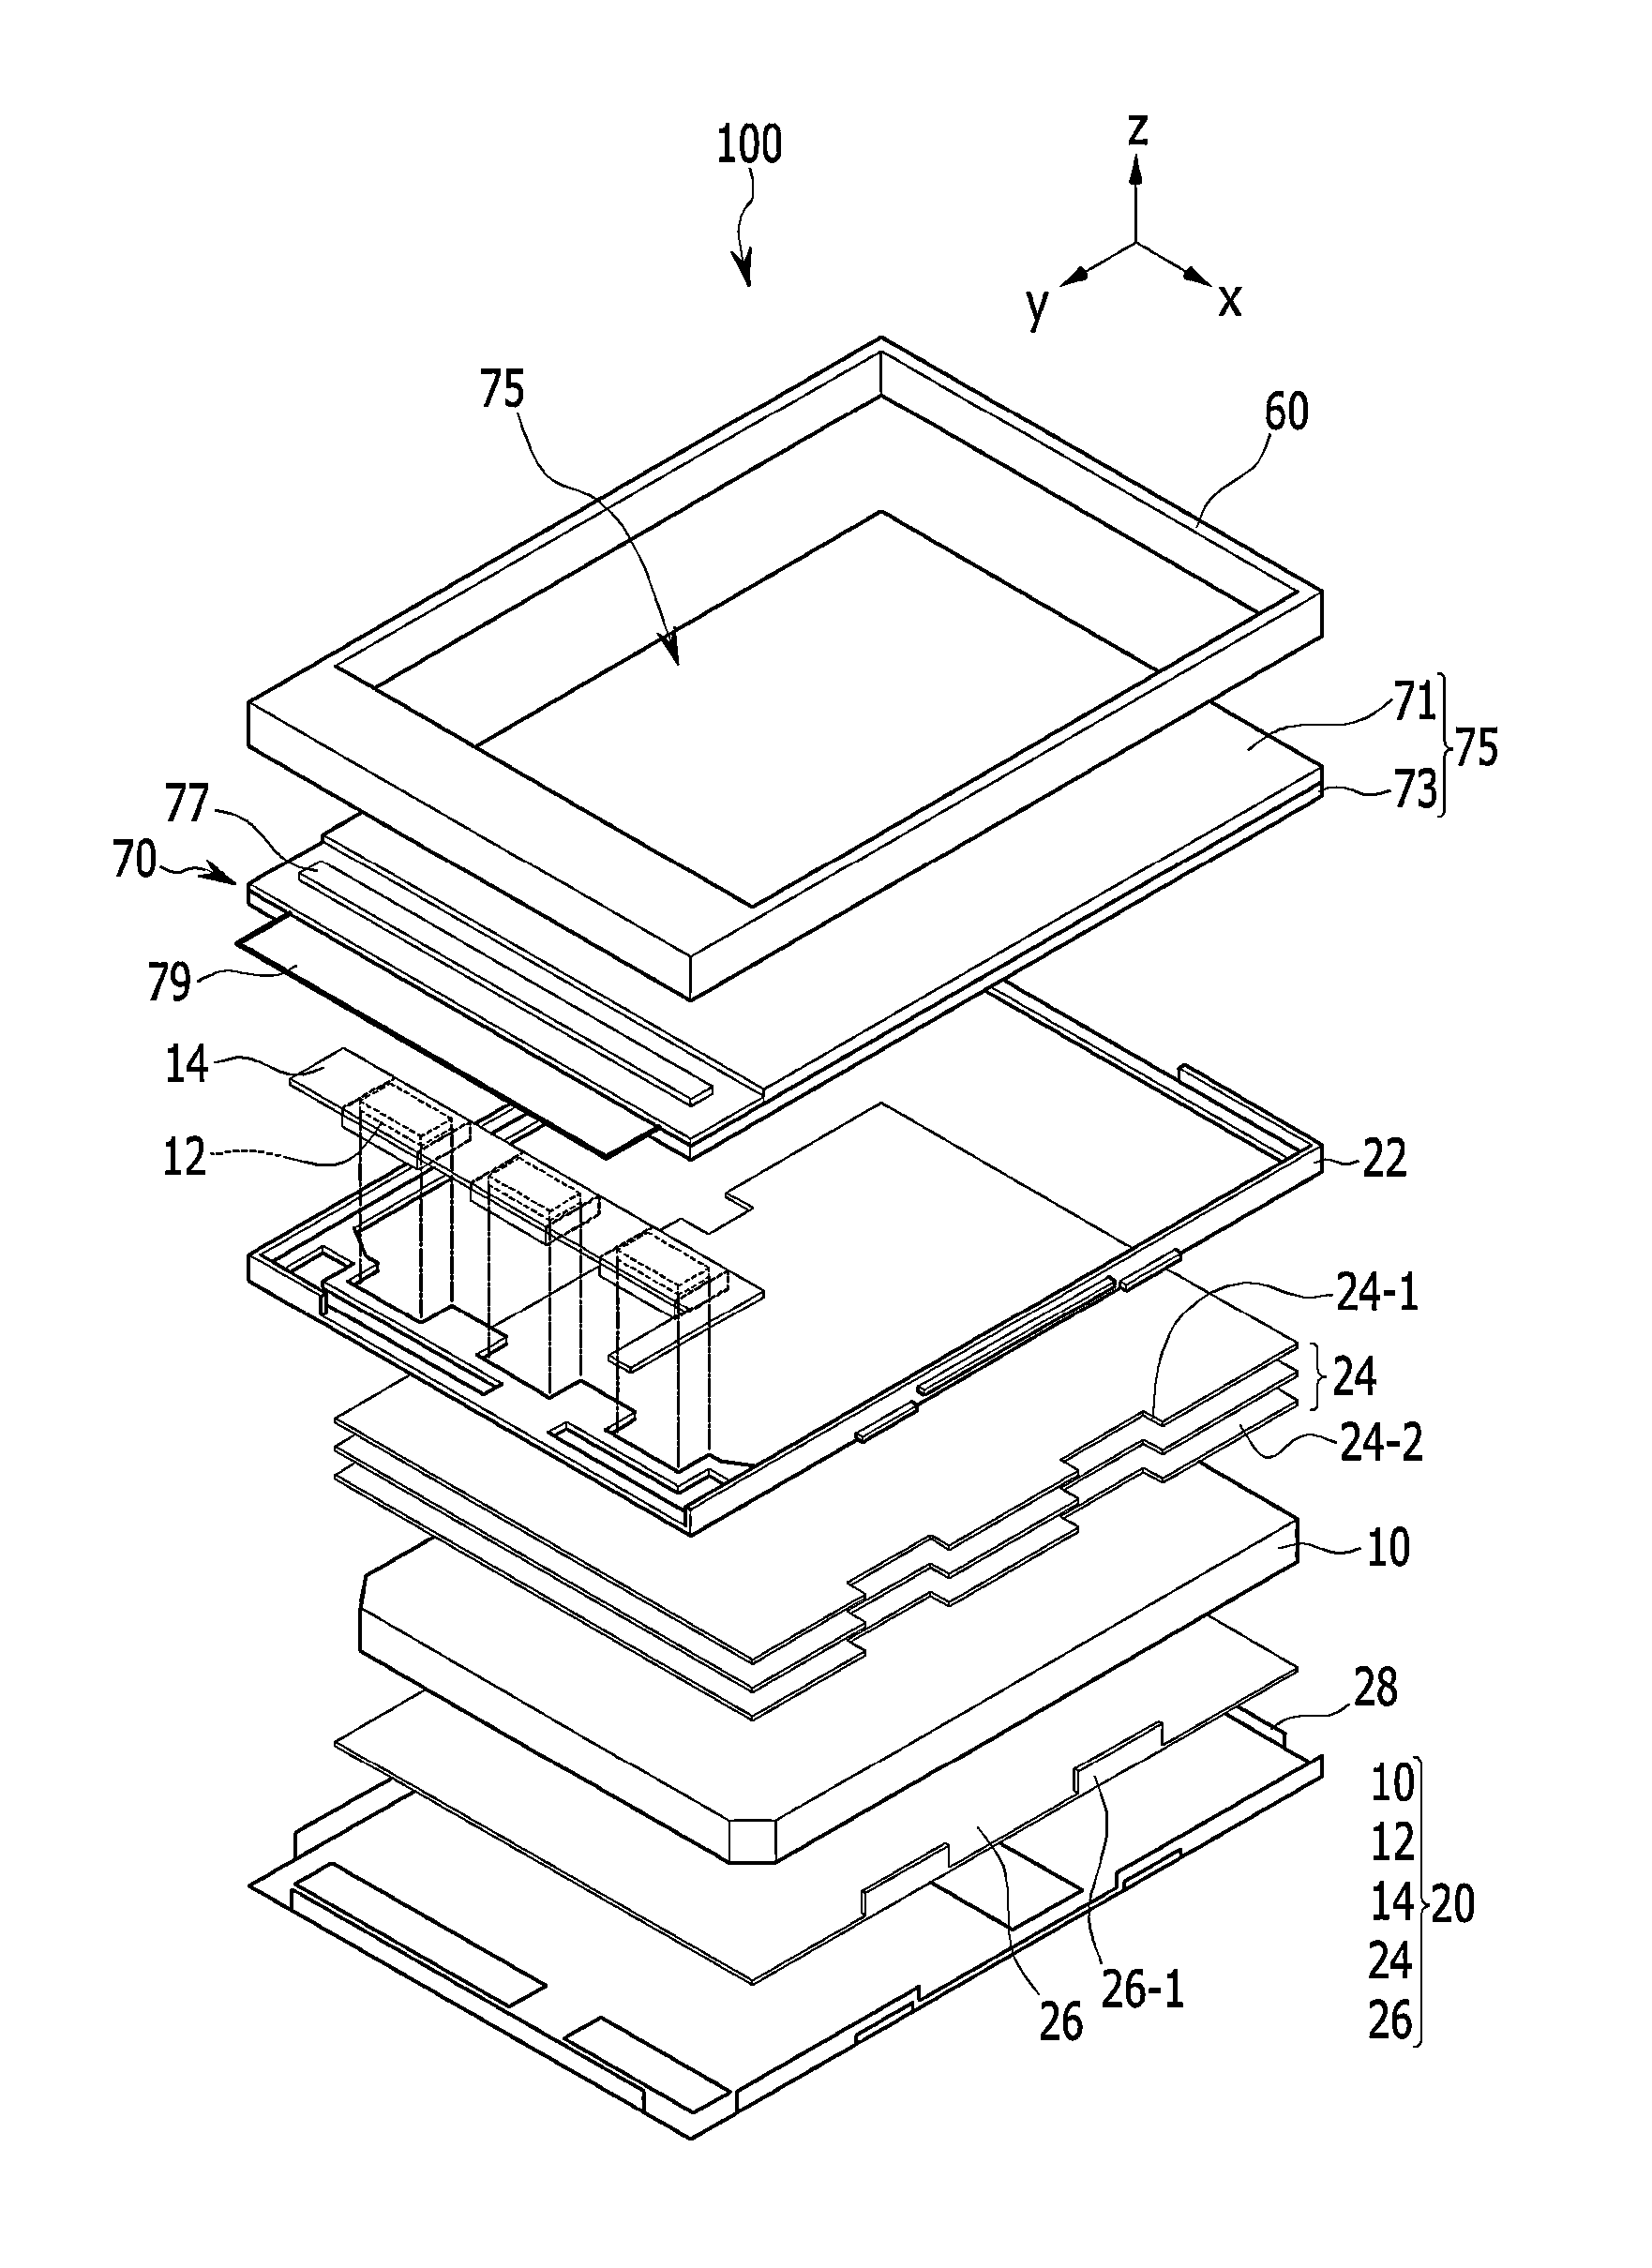 Optical sheet guide member, and backlight unit having the optical sheet guide member